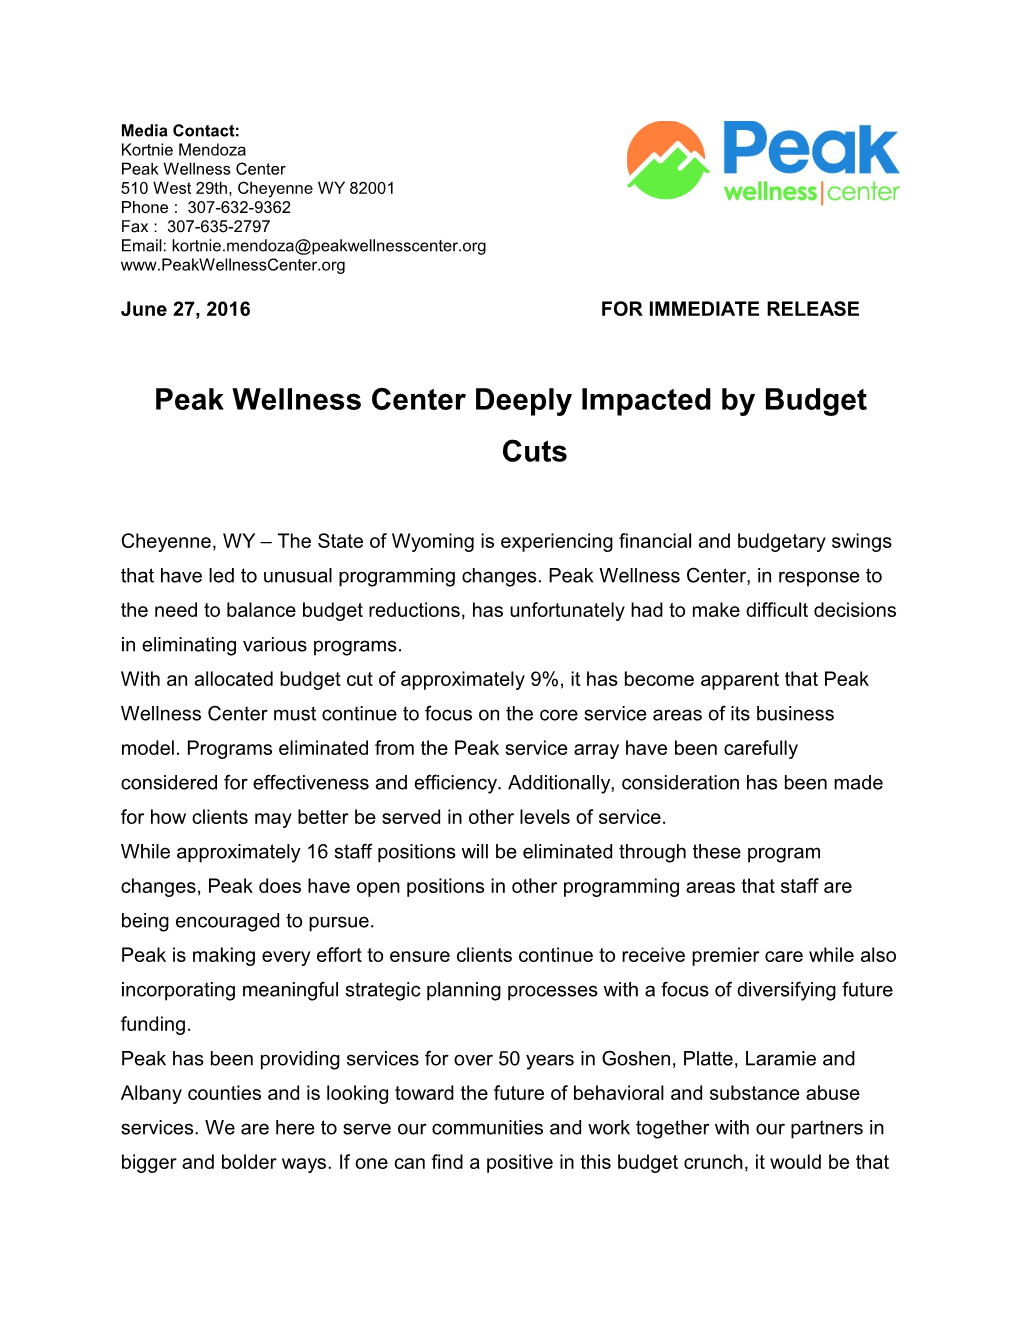 Peak Wellness Center Deeply Impacted by Budget Cuts